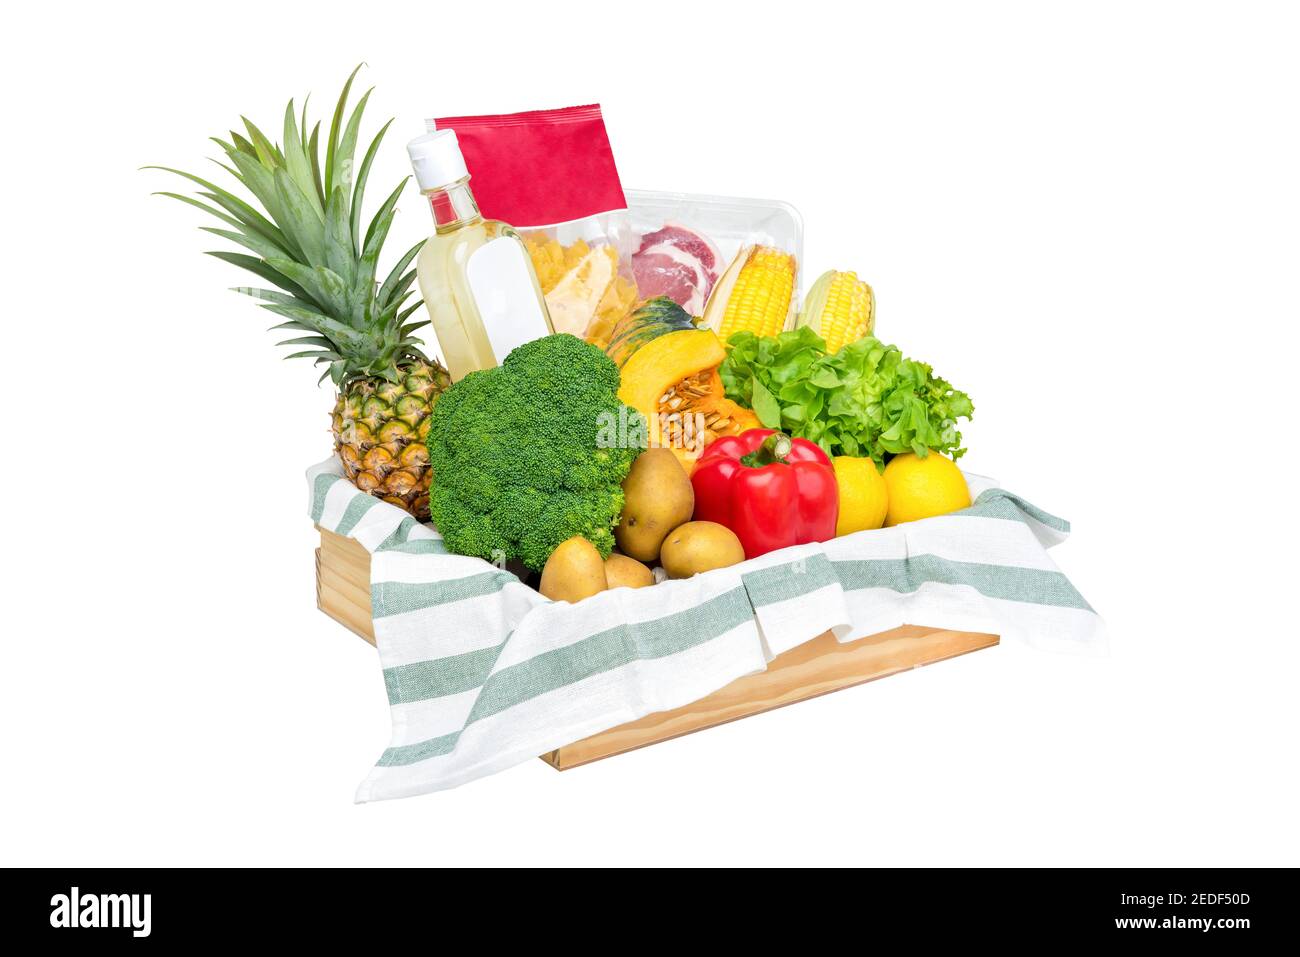 Fresh healthy groceries and vegetables from supermarket inwood tray box isolated on white background Stock Photo